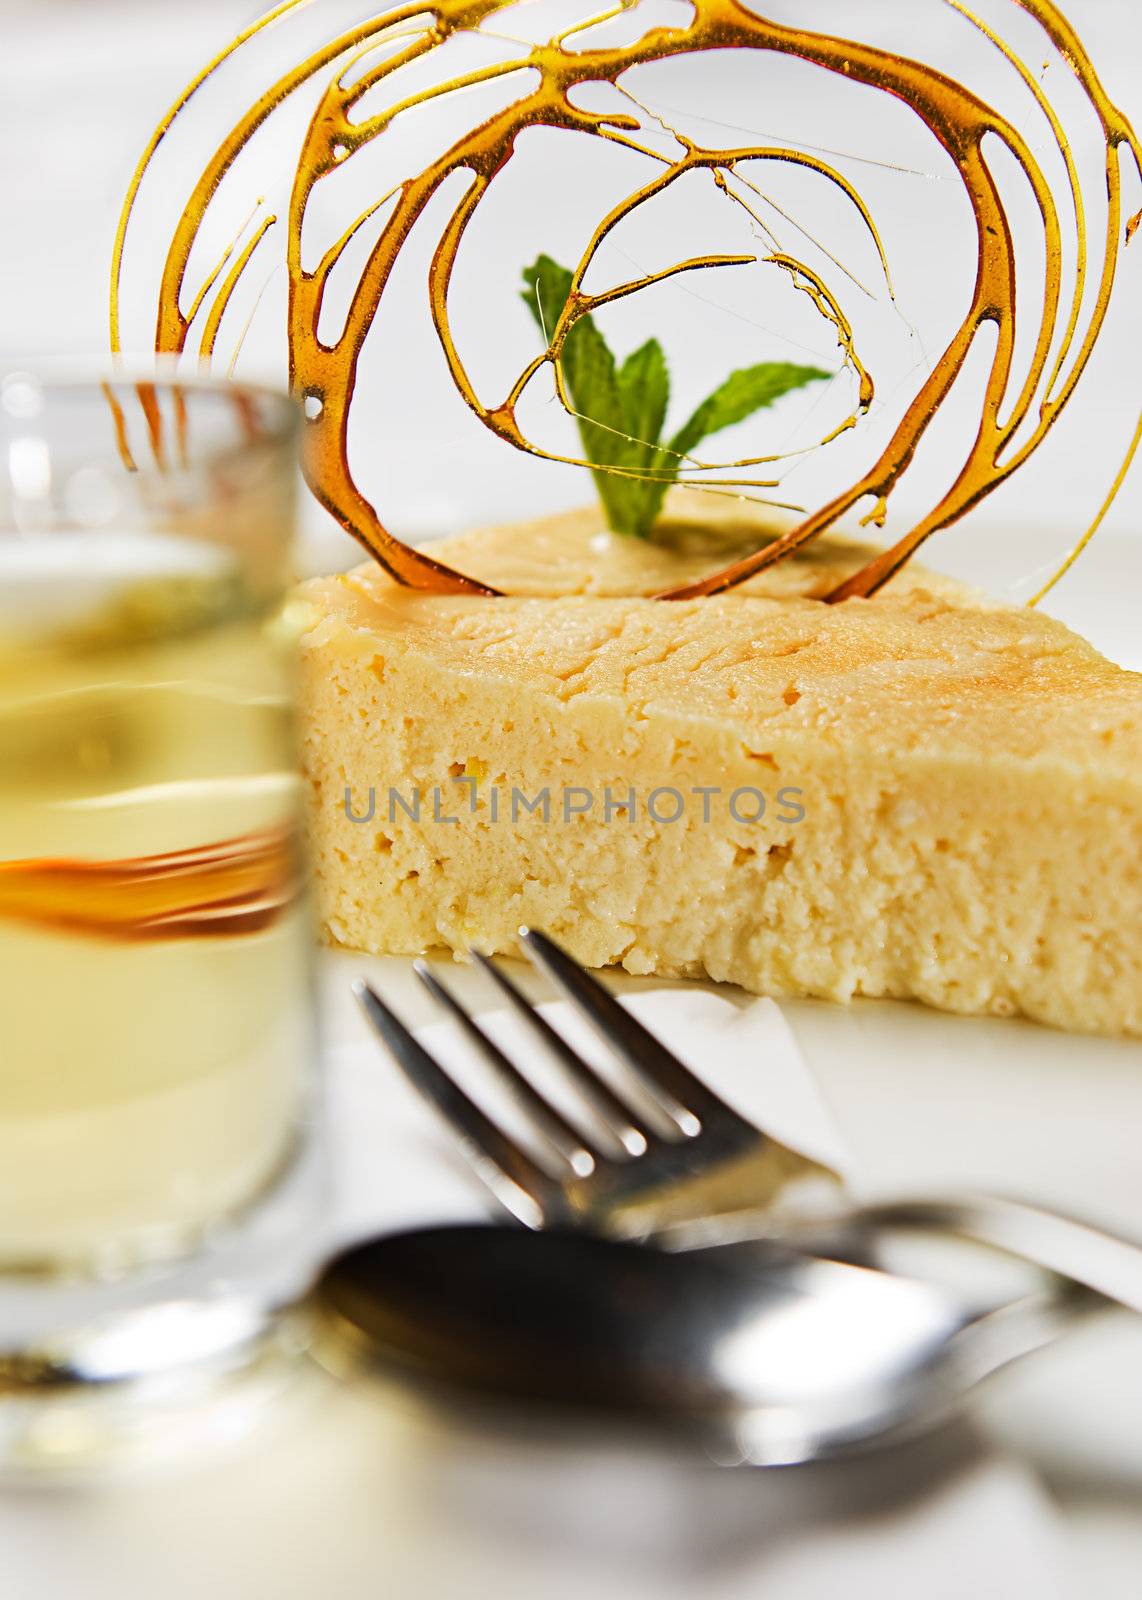 A delicious slice of cheesecake served with toffee, syrup and a dessert shot.